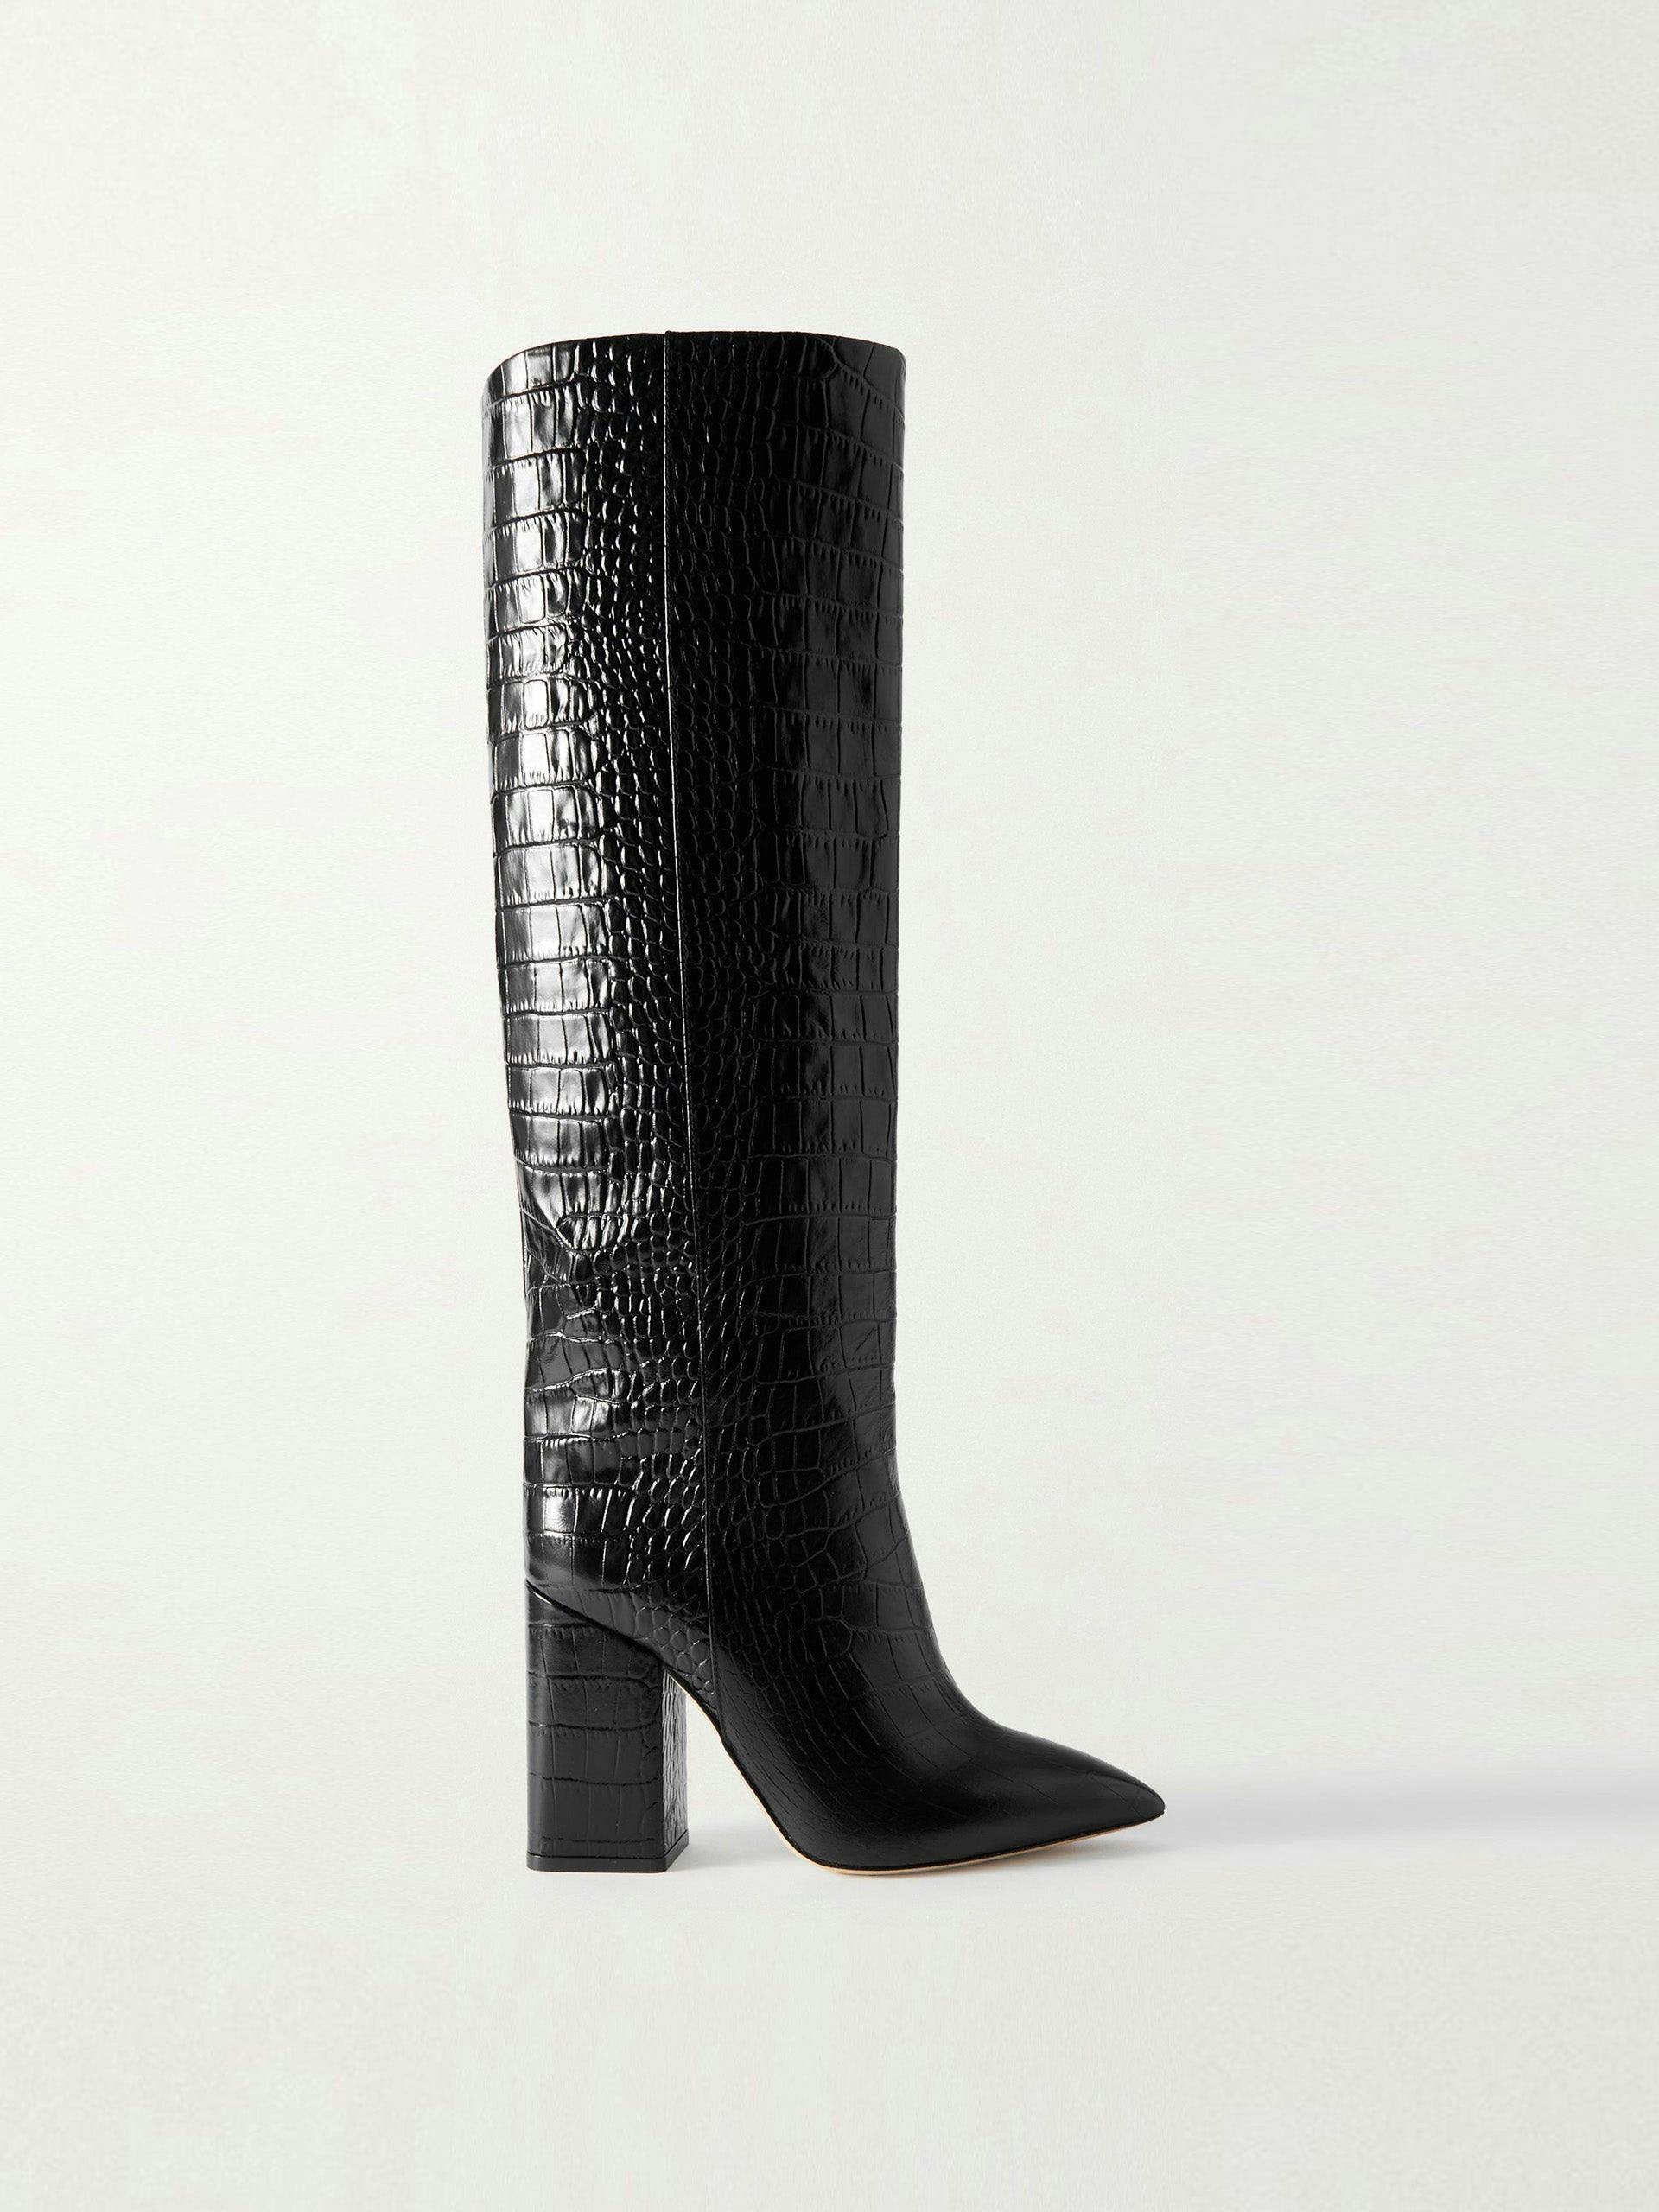 Anja croc-effect leather knee boots